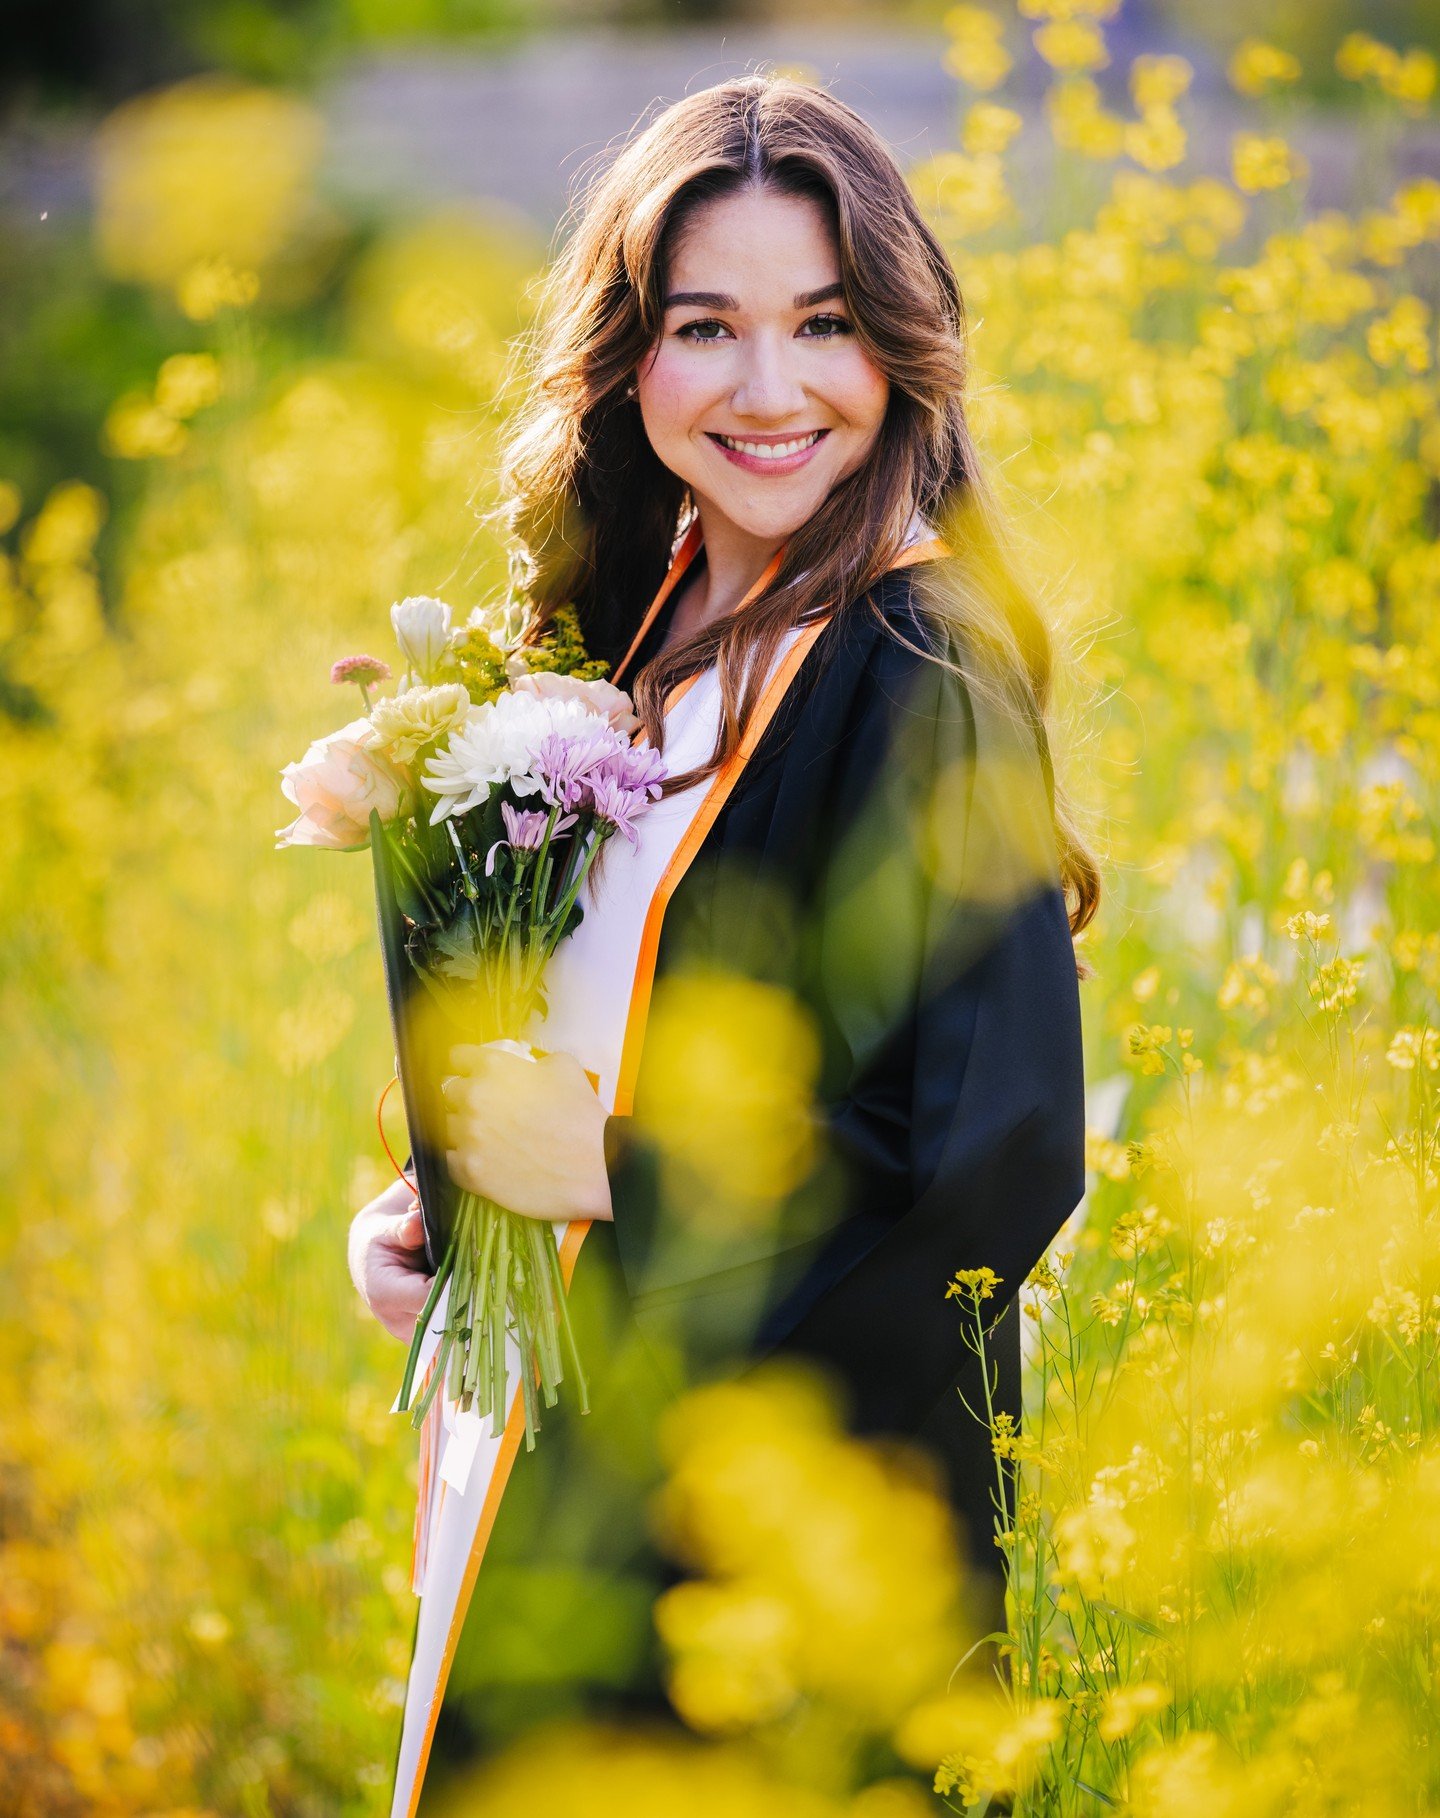 It's #graduation season, and we recently had the pleasure of capturing Dominique's #SeniorPortraits at the #UTGardens in Knoxville, TN. The location was full of natural beauty, with blooming flowers and vibrant greenery surrounding us.

Despite the s